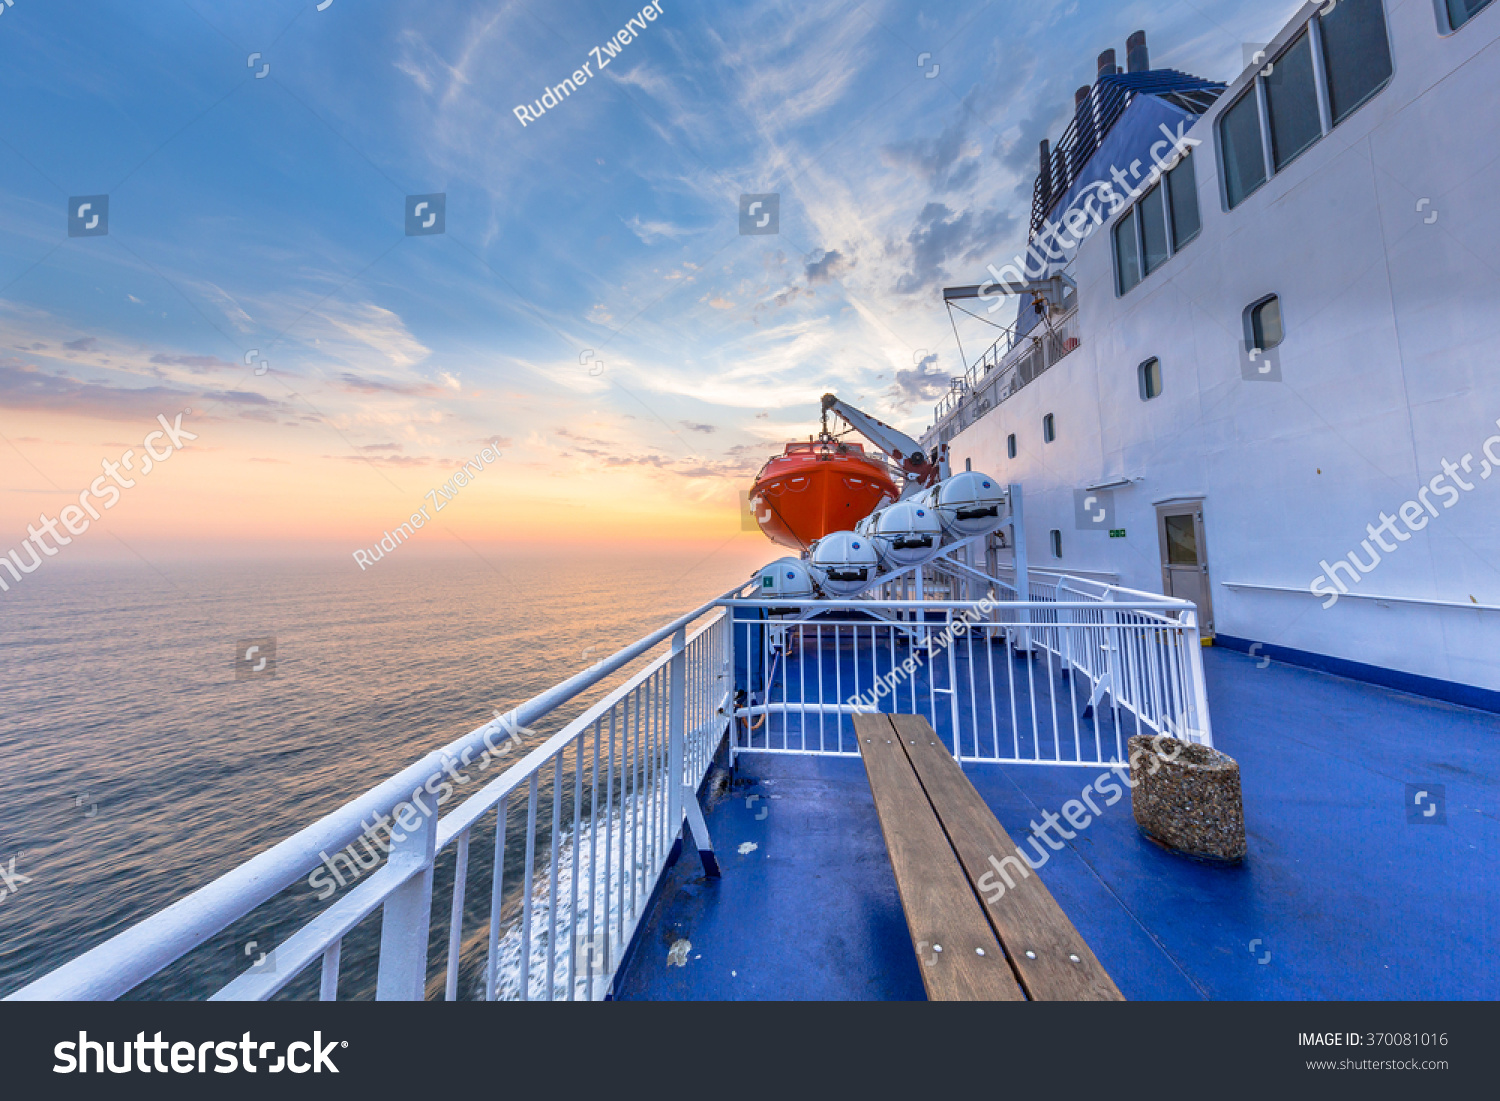 Deck on Ferry sailing across the Northsea during beautiful sunset #370081016